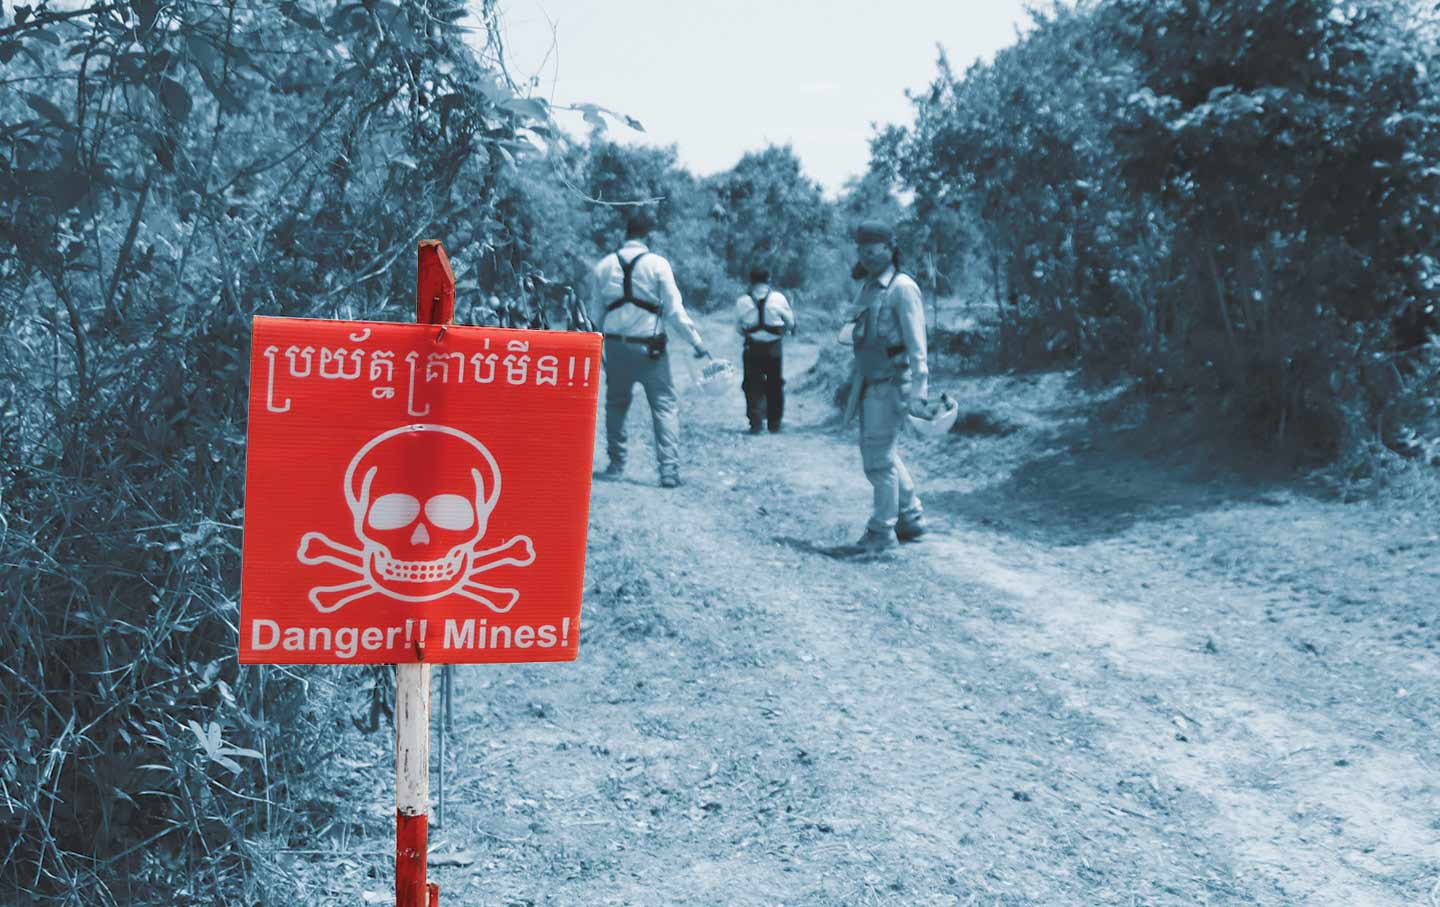 Cambodia is afflicted with some of the highest concentrations of land mineson earth.